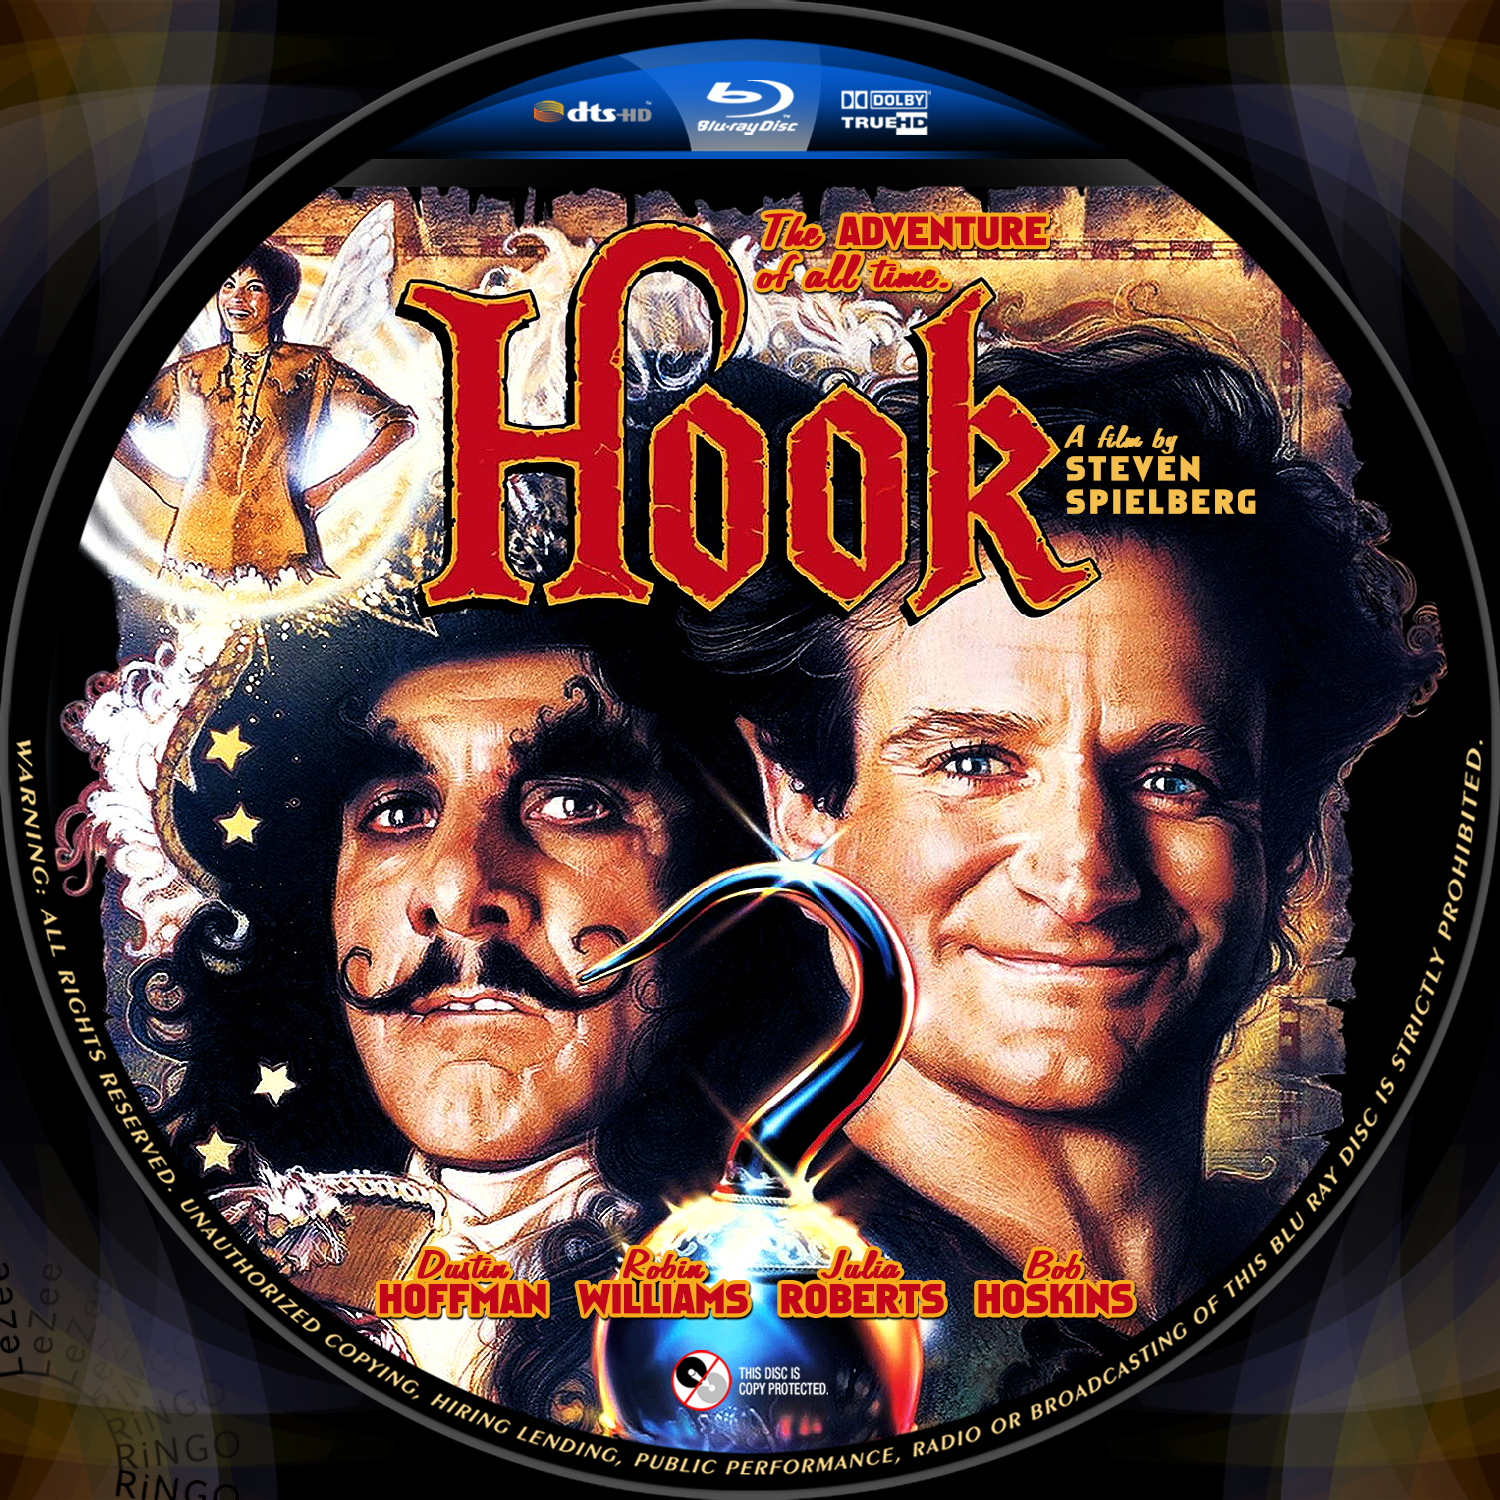 COVERS.BOX.SK ::: Hook (1991) - high quality DVD / Blueray / Movie